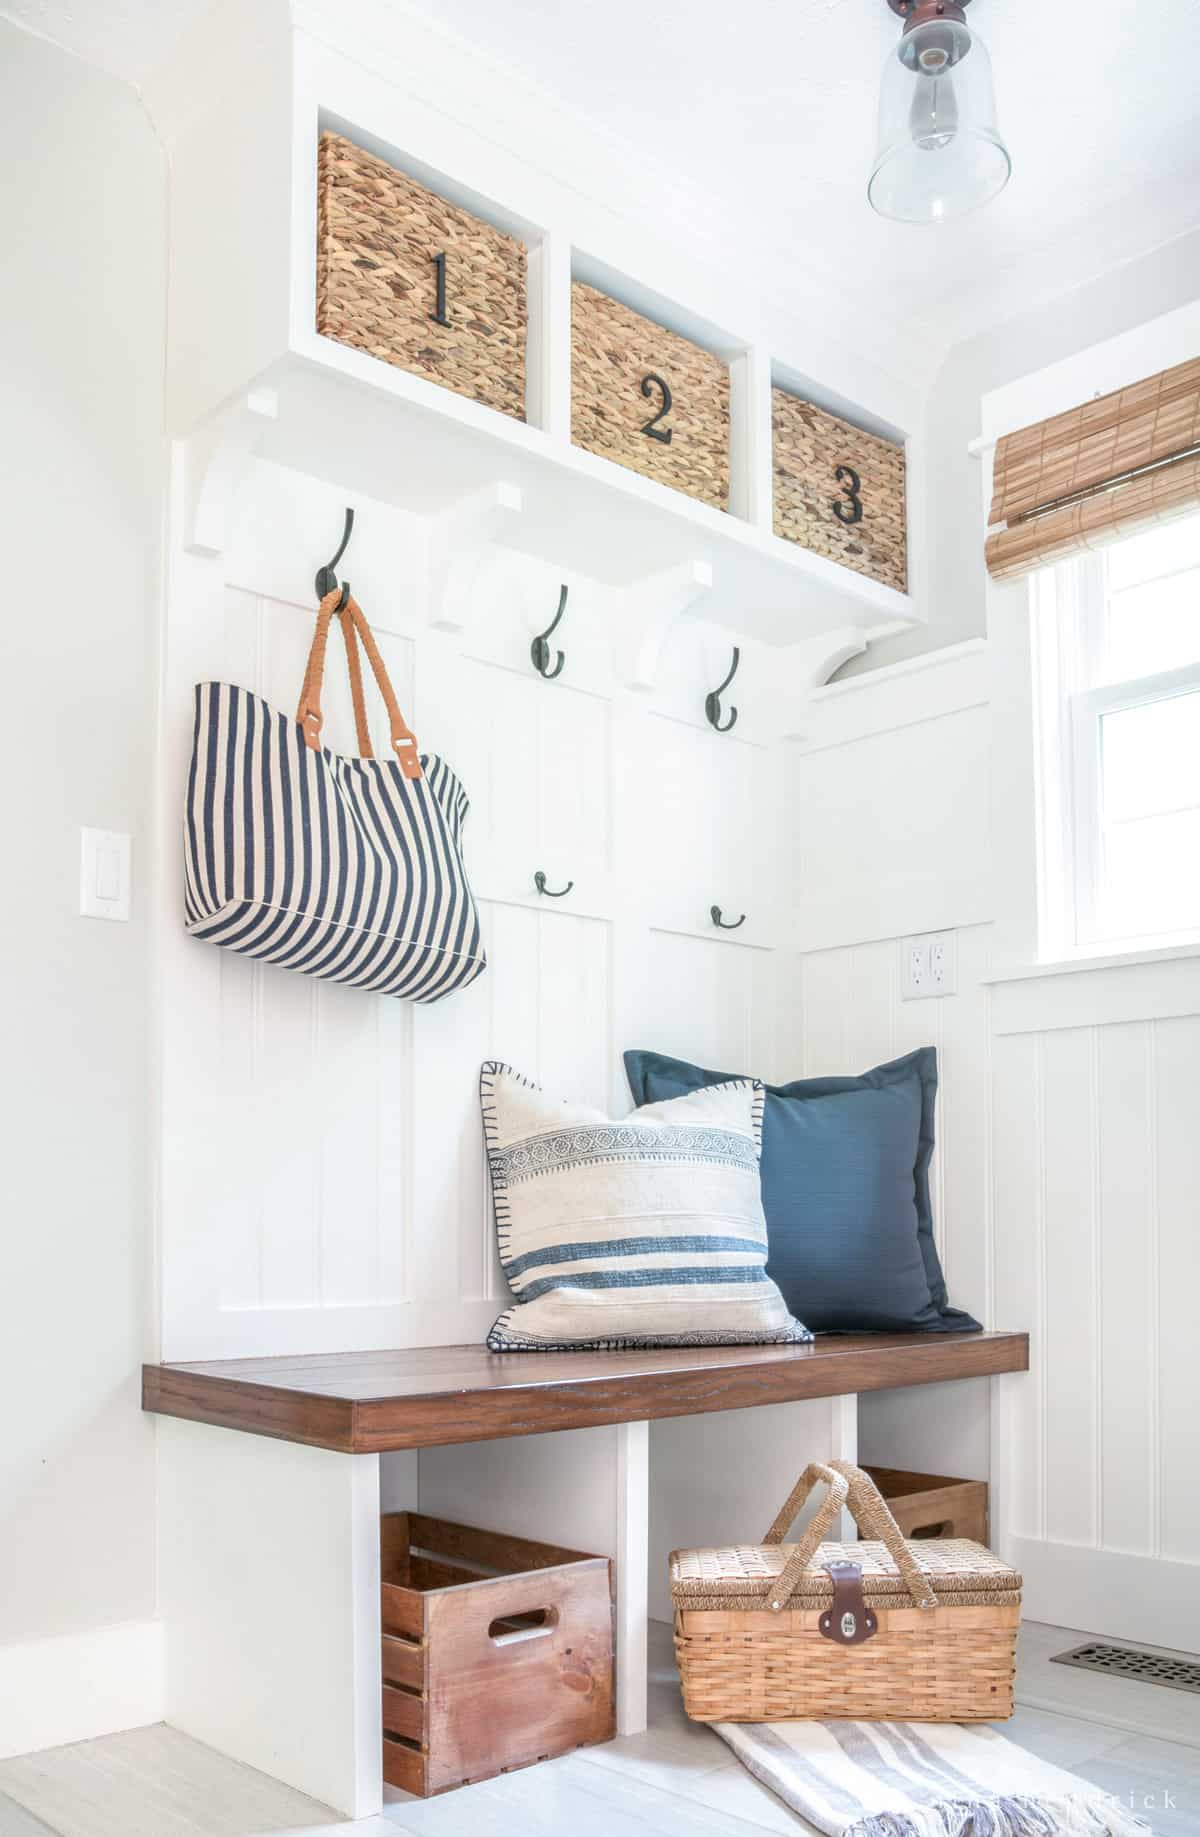 Mudroom home organization with built-in bench, numbered baskets, hooks, and crates.